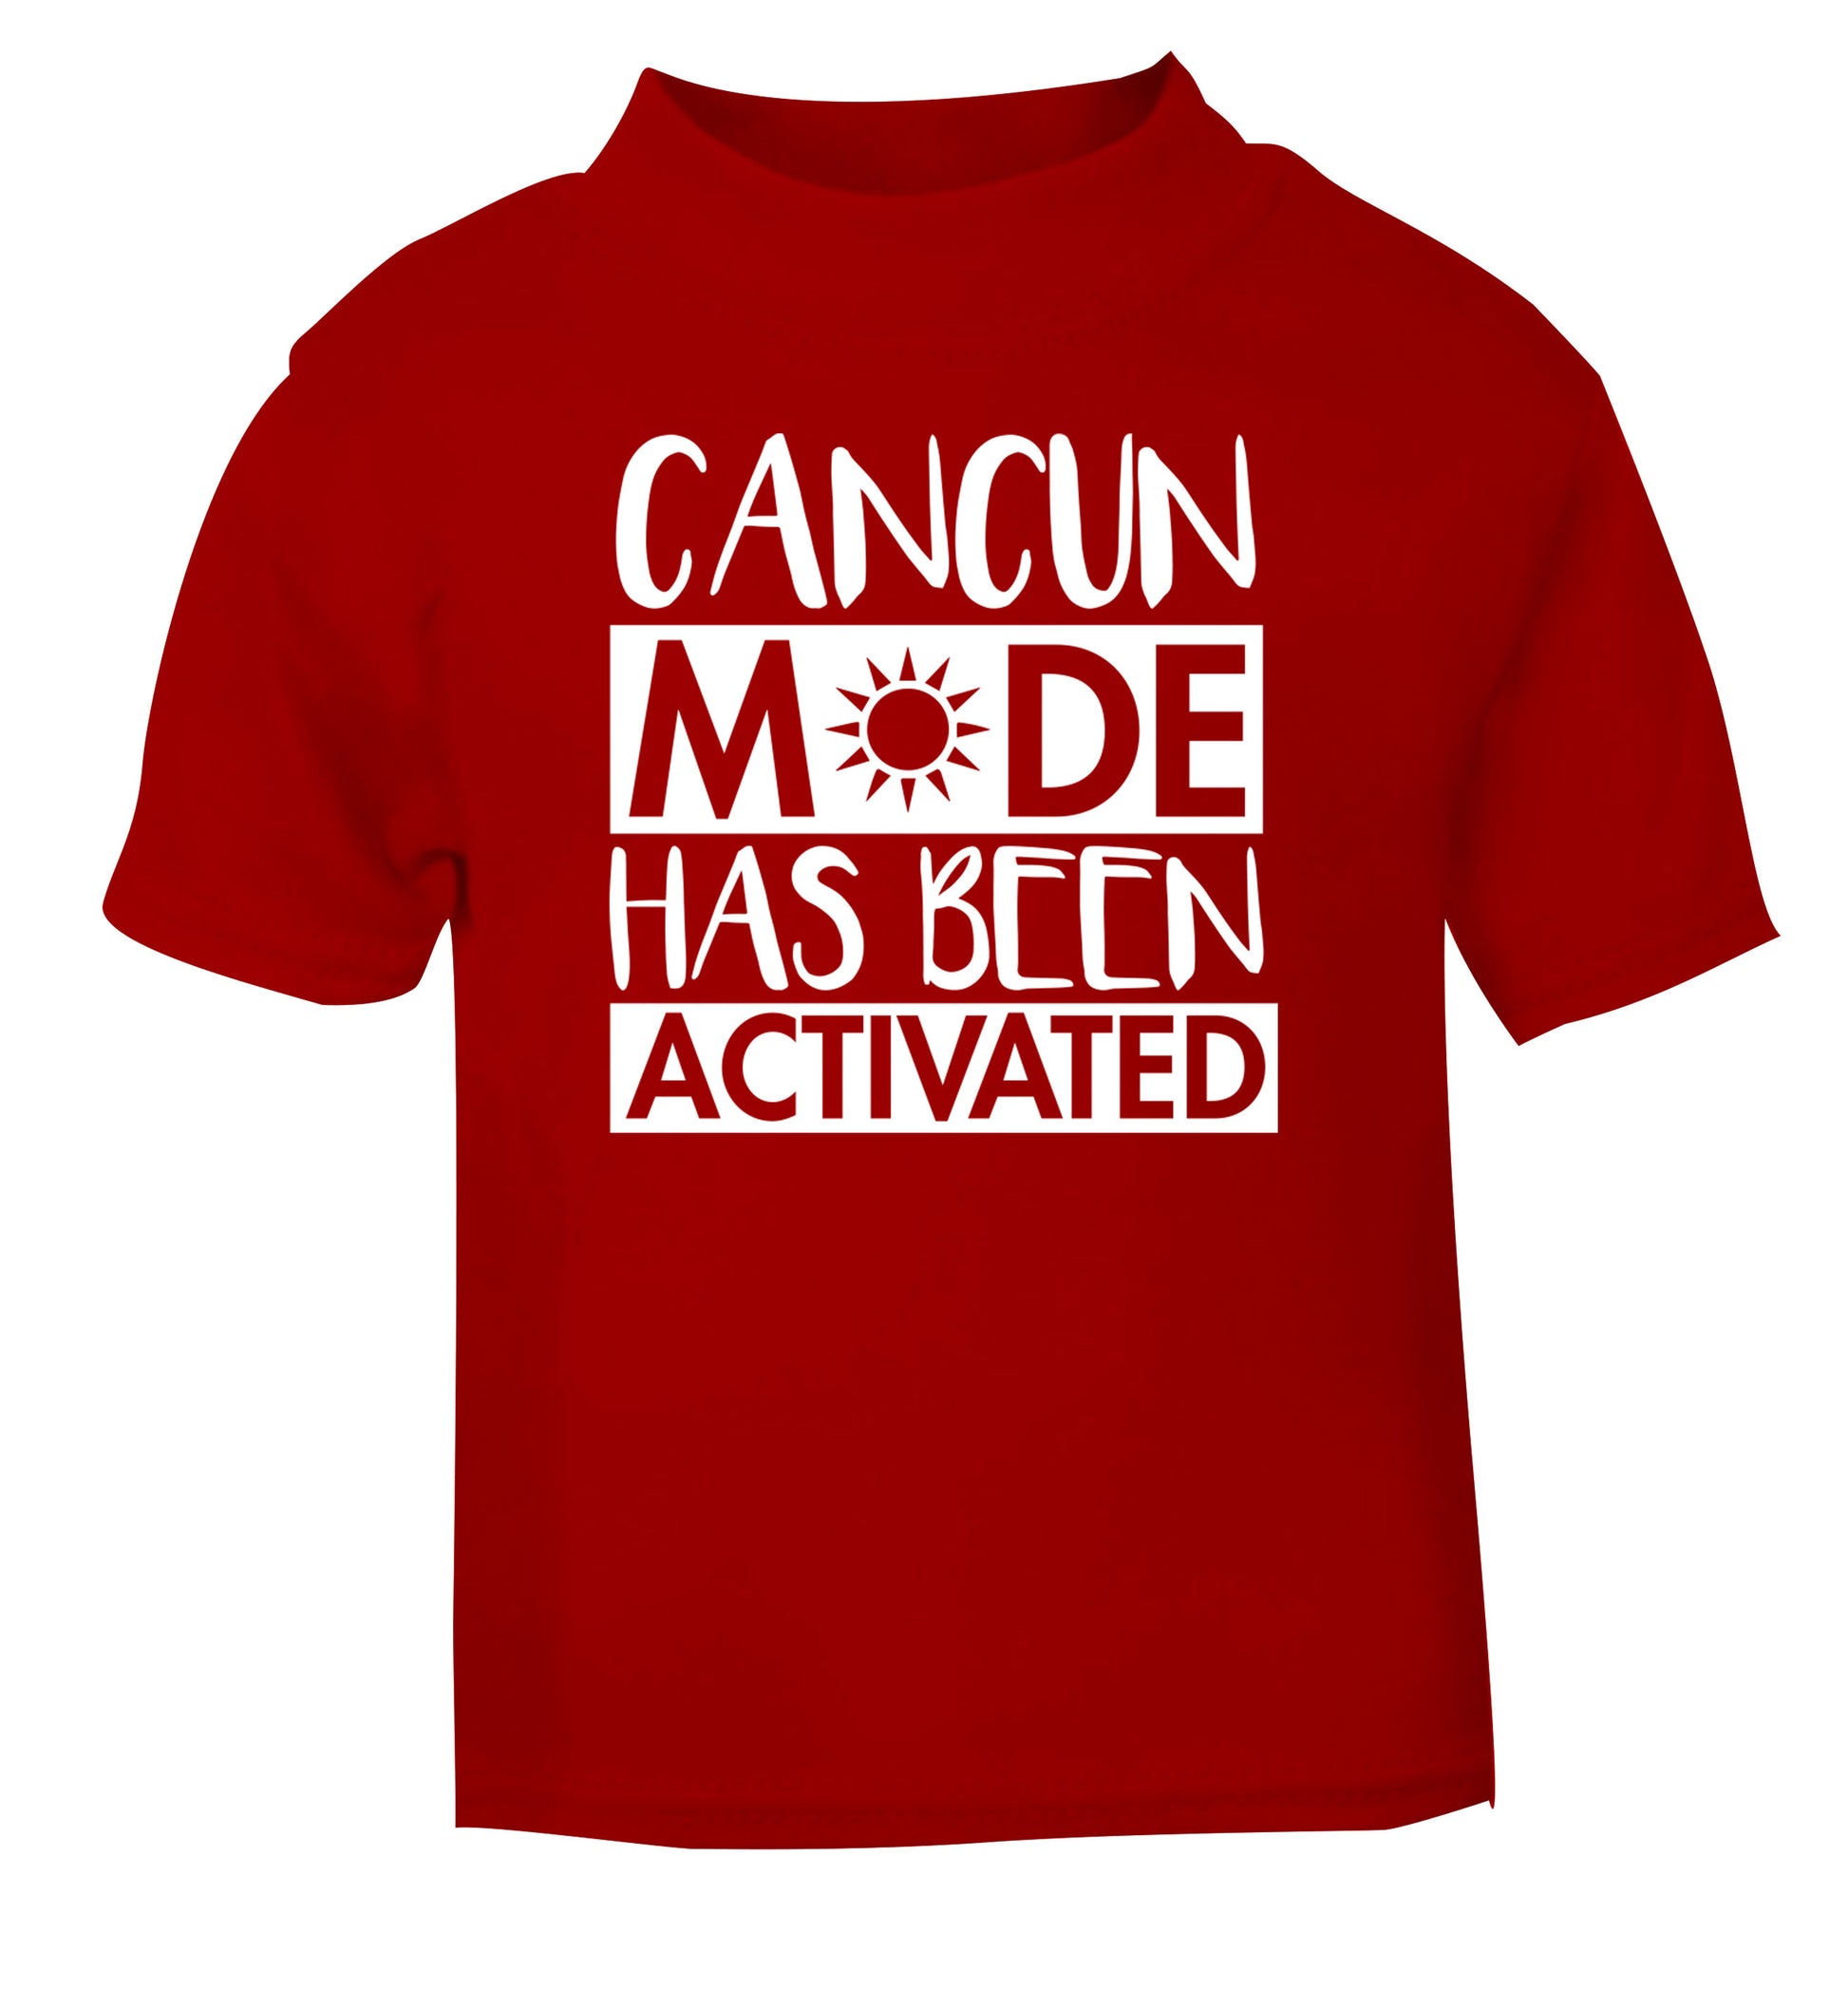 Cancun mode has been activated red Baby Toddler Tshirt 2 Years